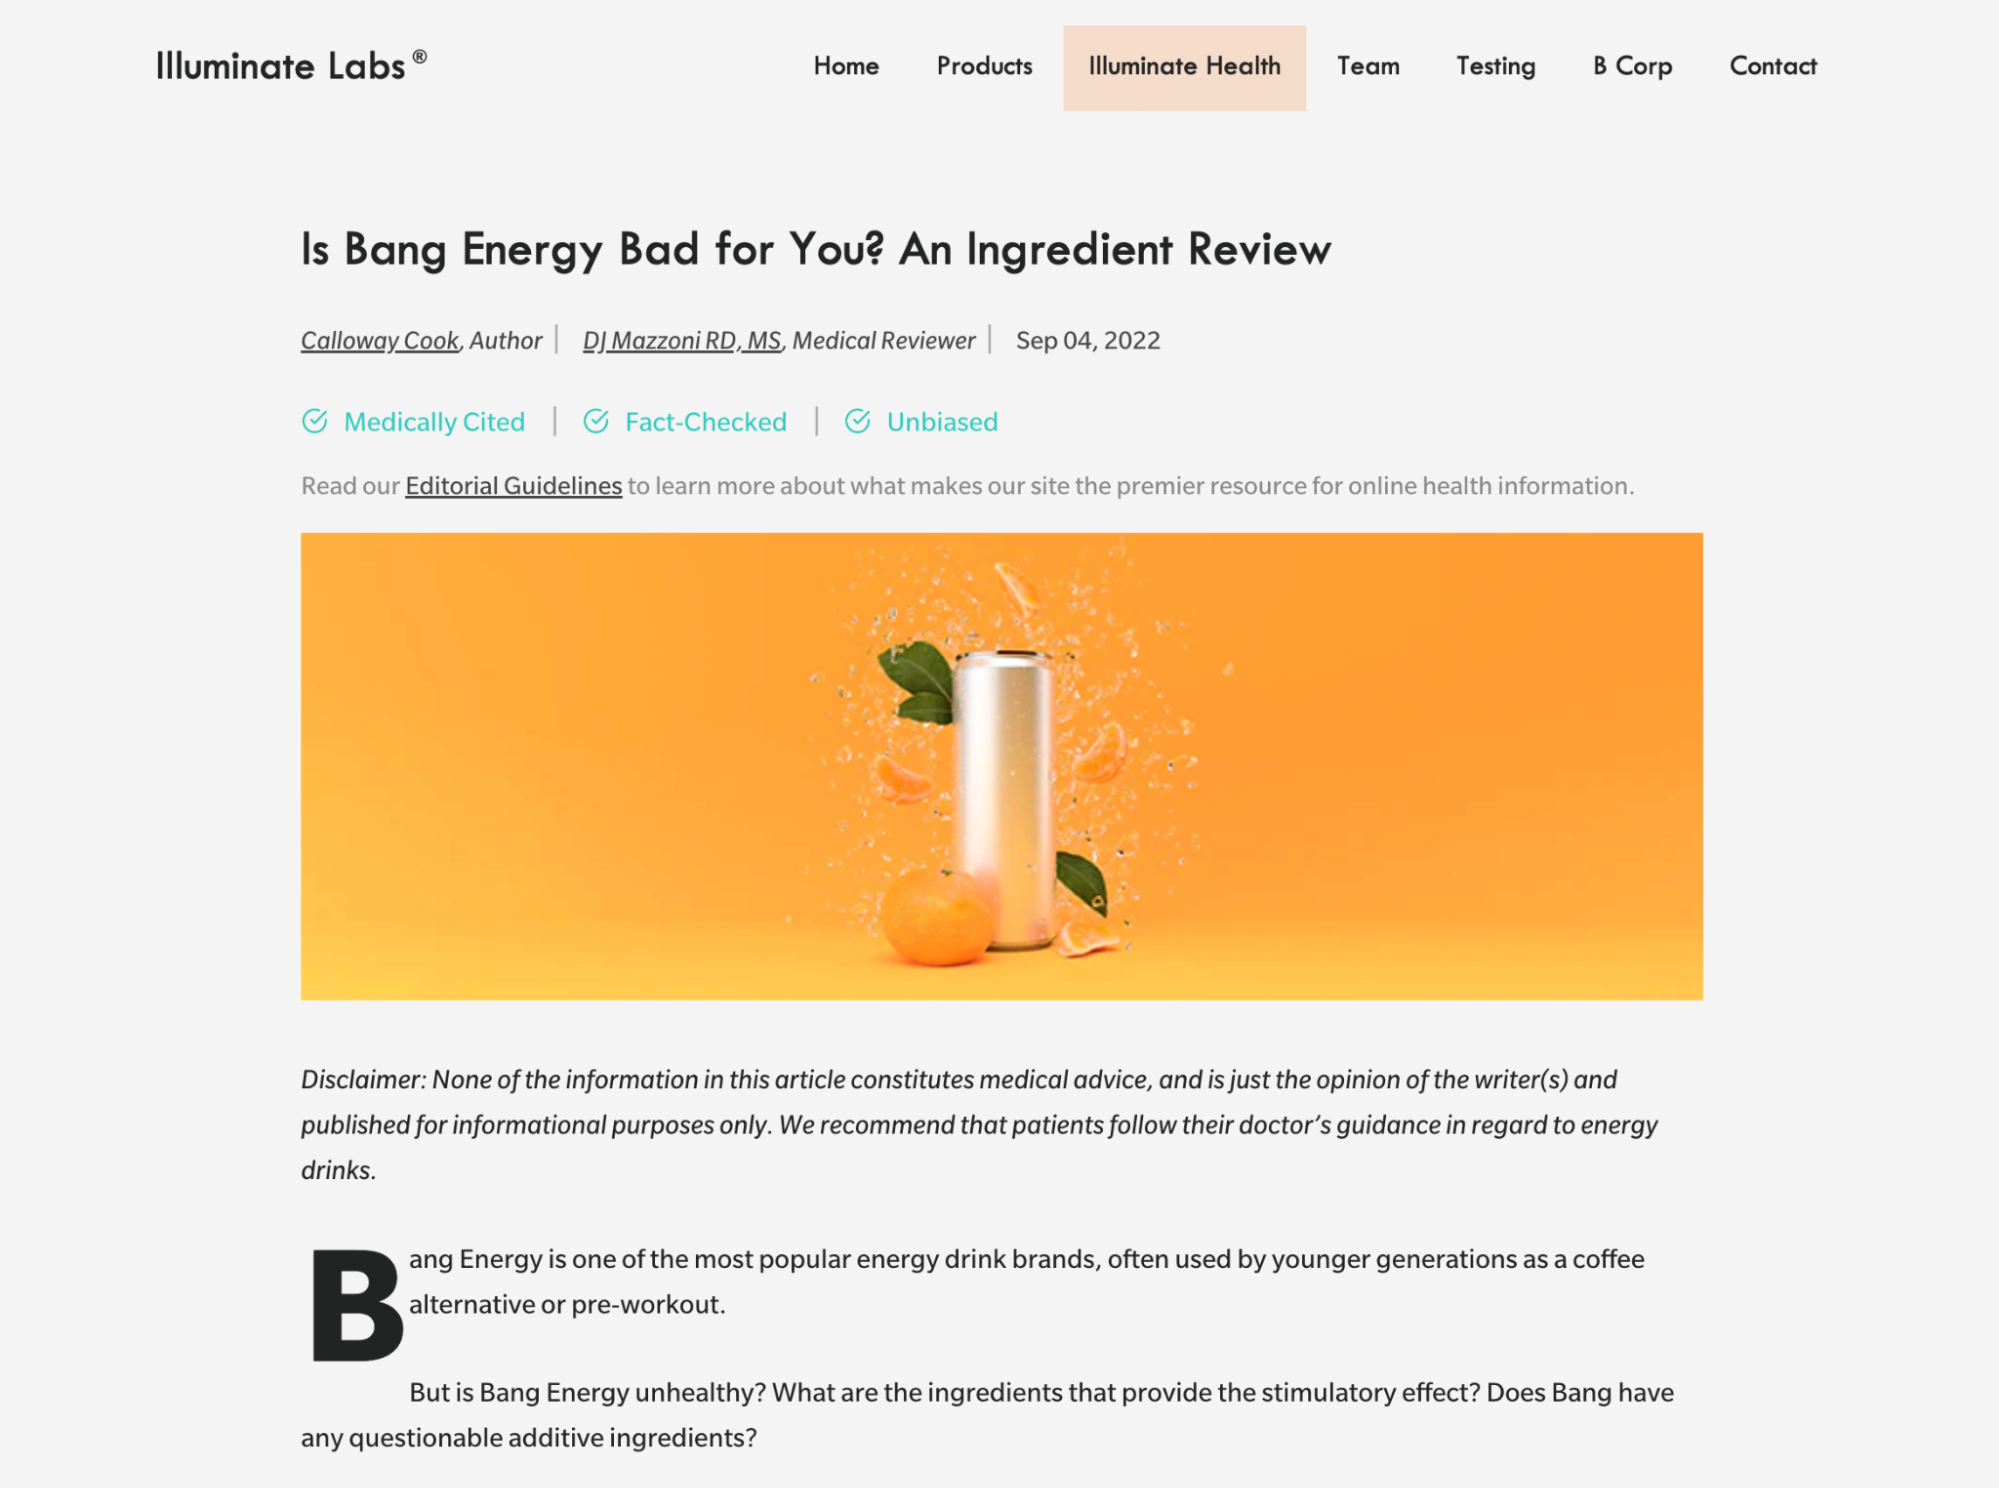 Screenshot of a blog post from Illuminate Health that discusses whether Bang Energy is bad for you.